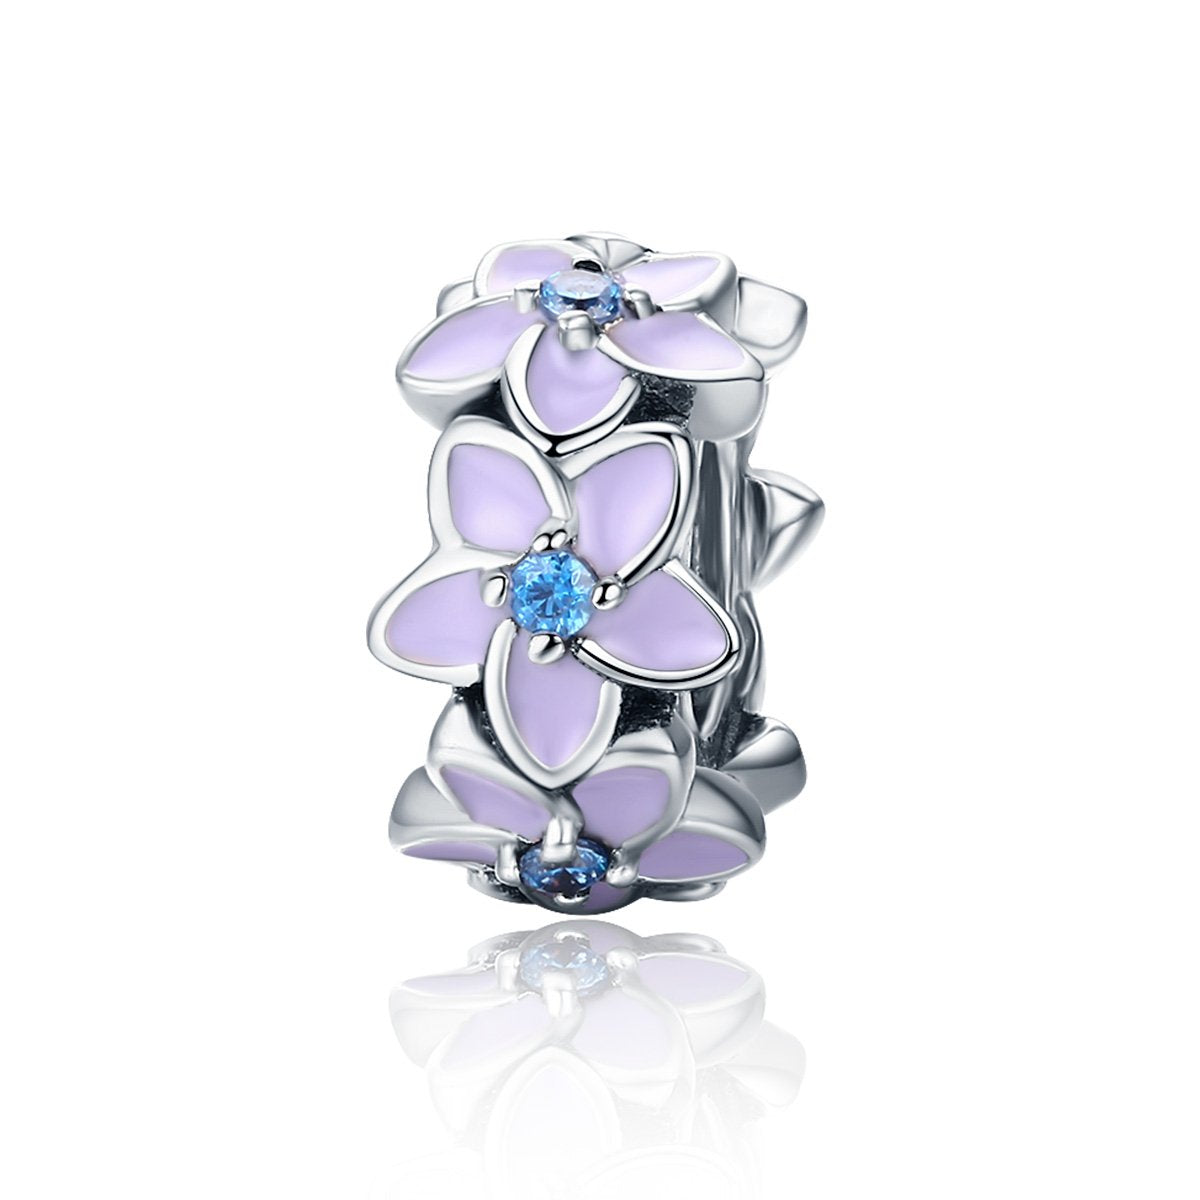 Sterling 925 silver charm the violet floral circle bead pendant fits Pandora charm and European charm bracelet Xaxe.com